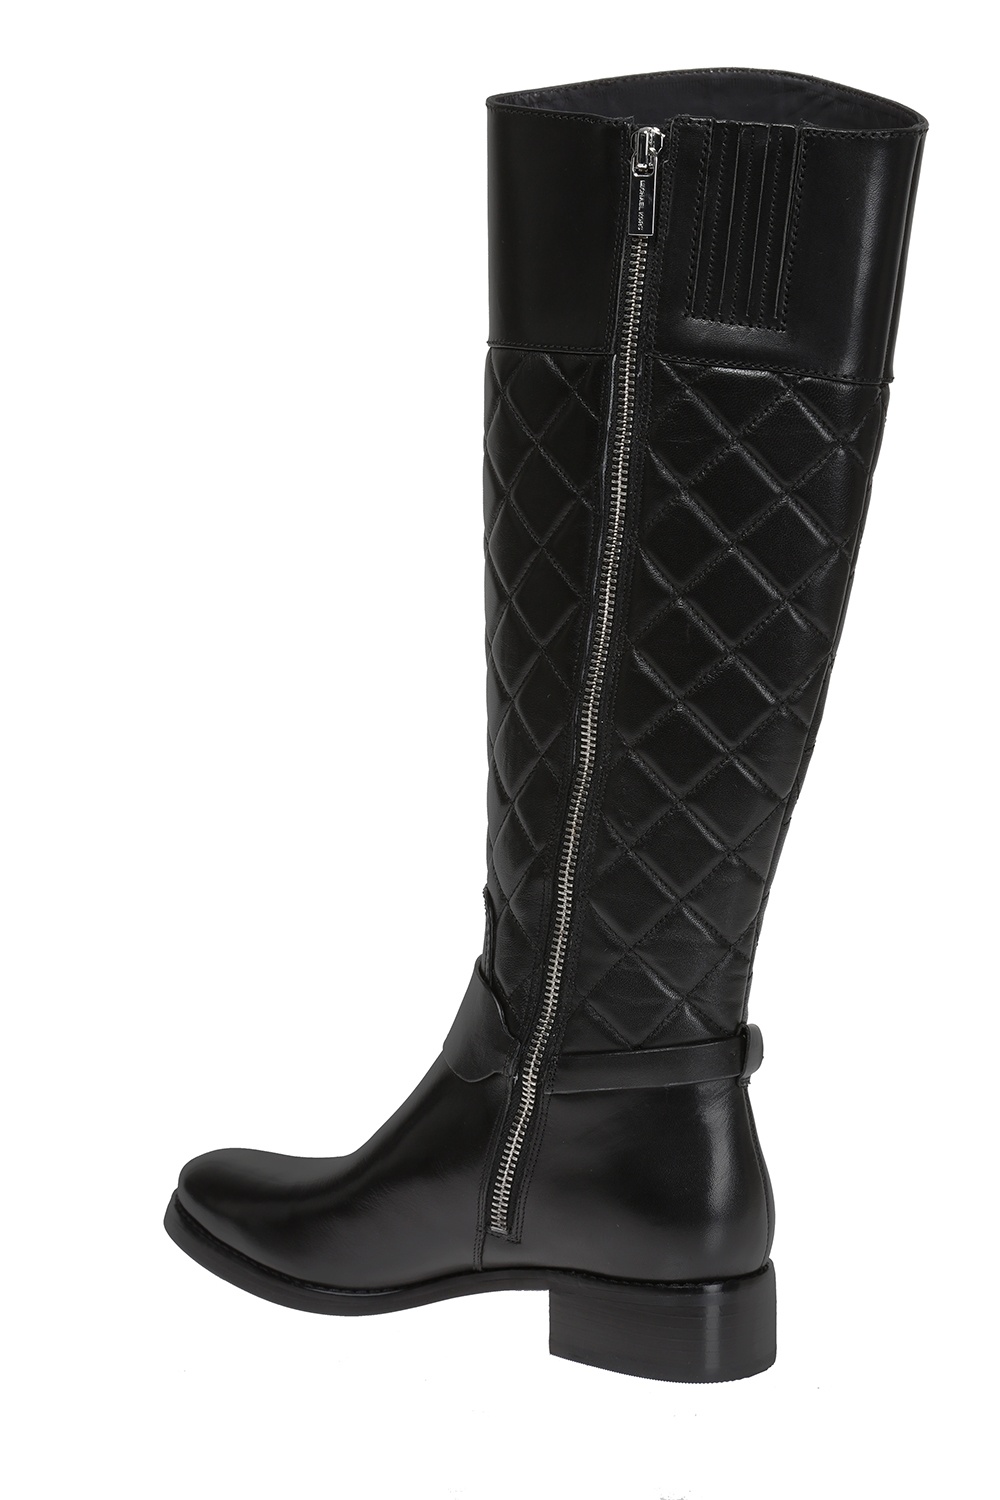 michael kors quilted boots